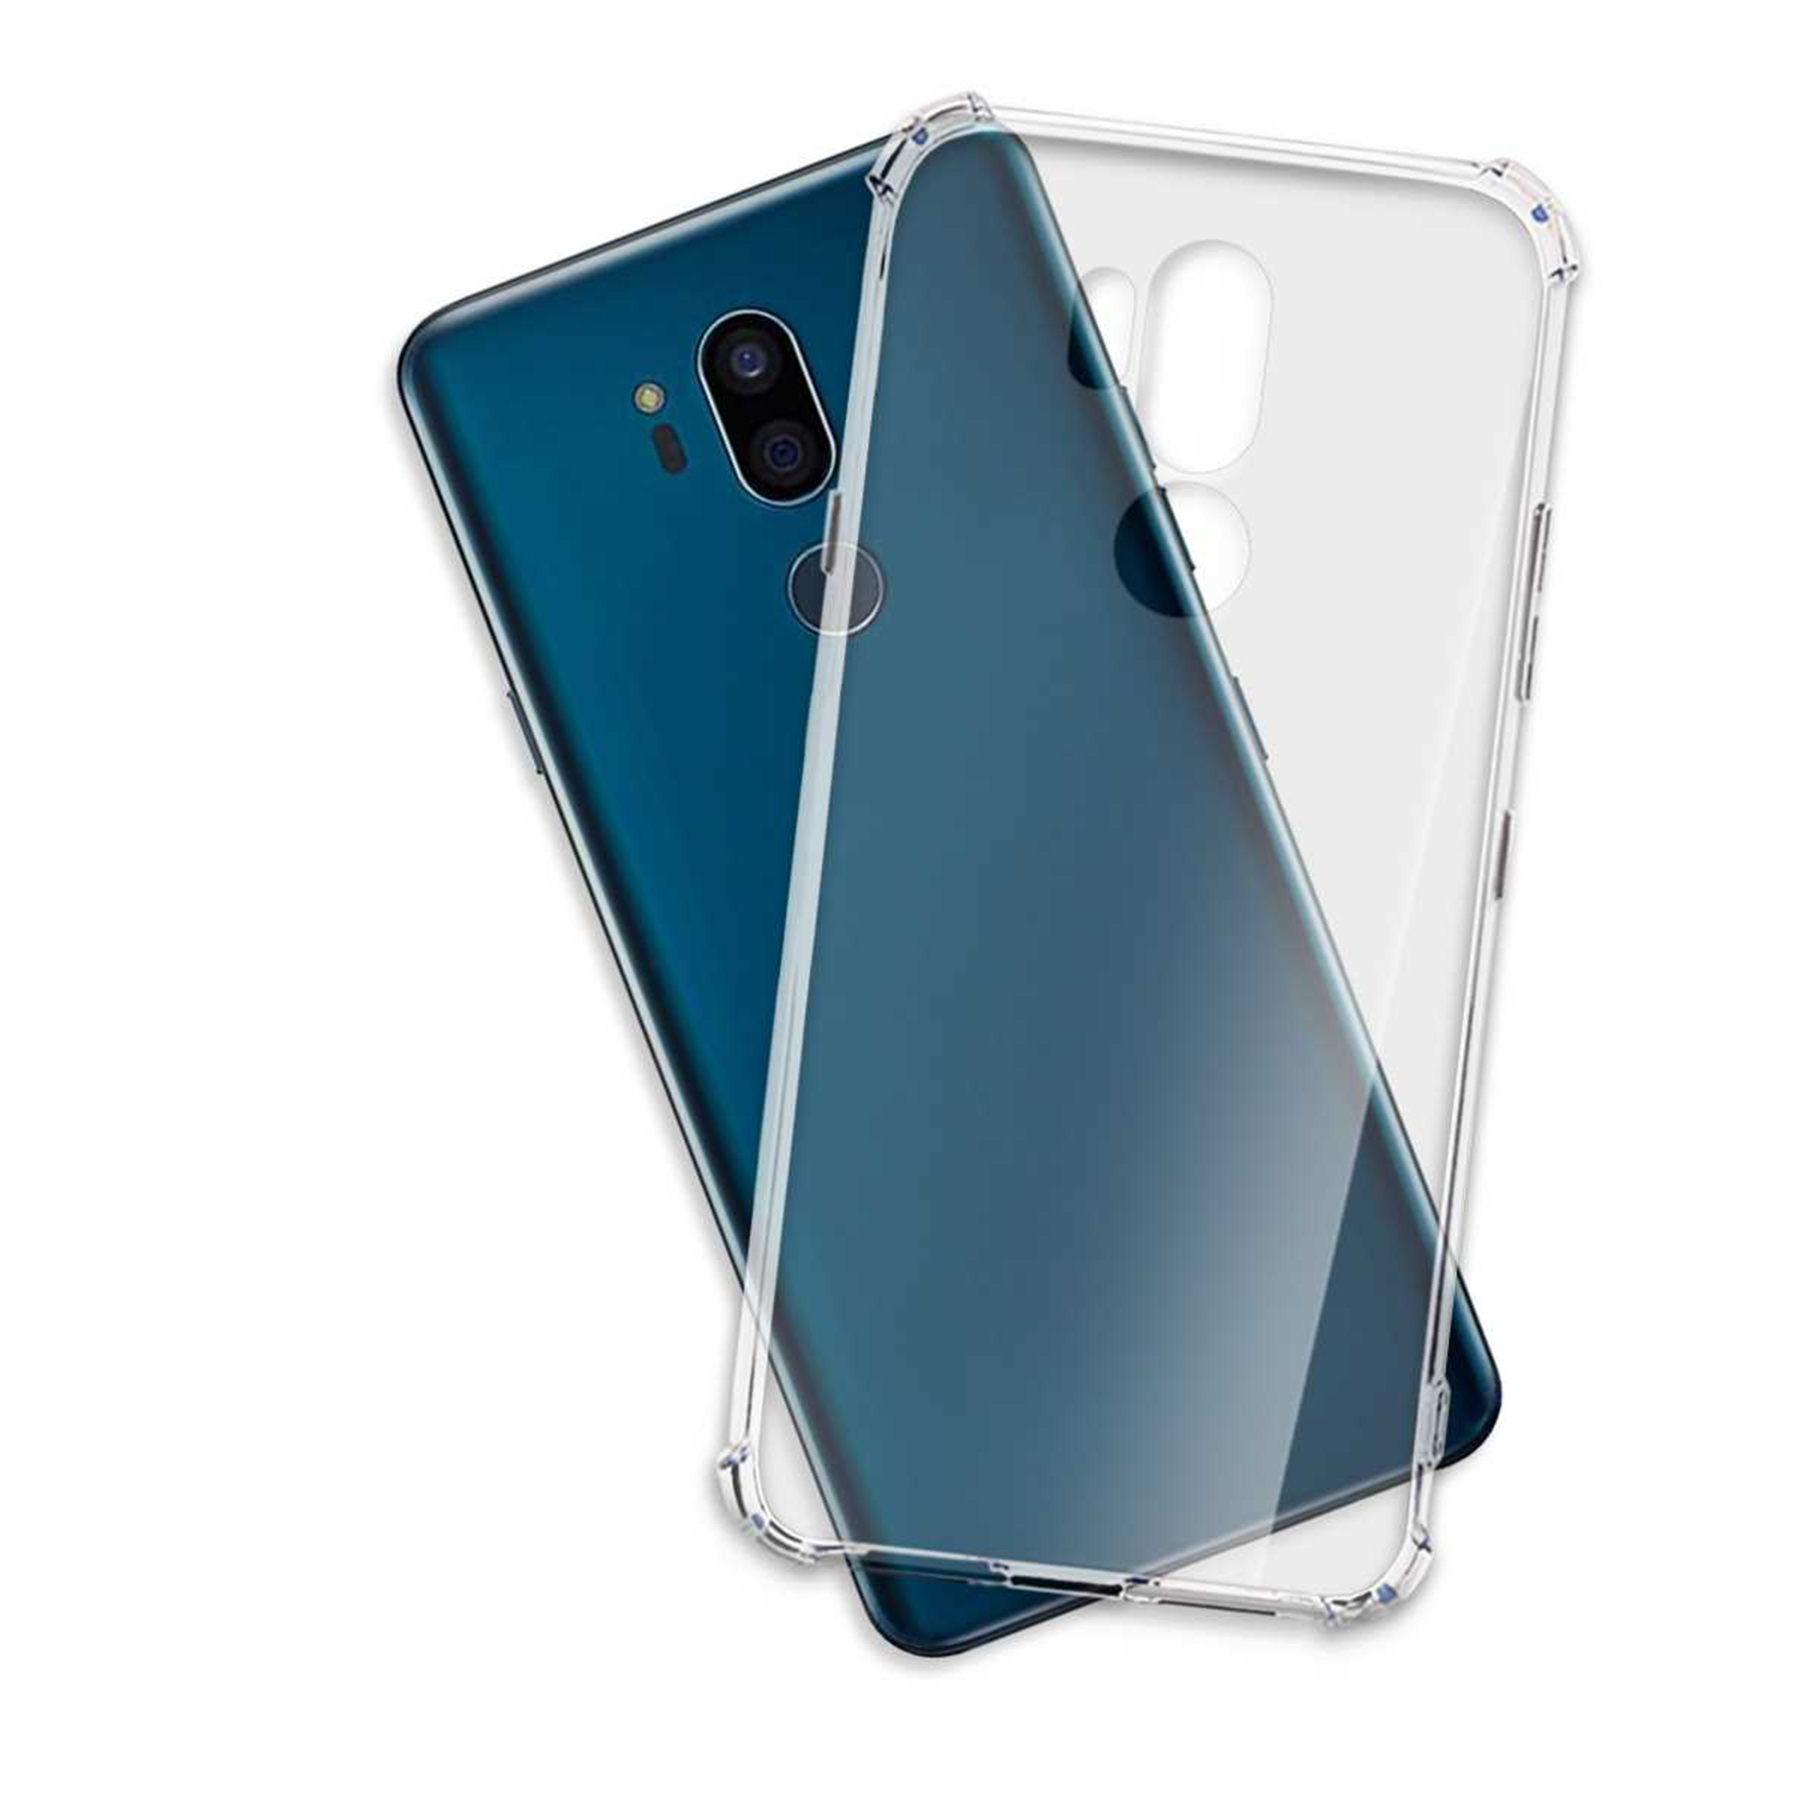 MTB LG, Thin Armor Backcover, ENERGY Case, Clear Q, MORE G7 G7+, Transparent